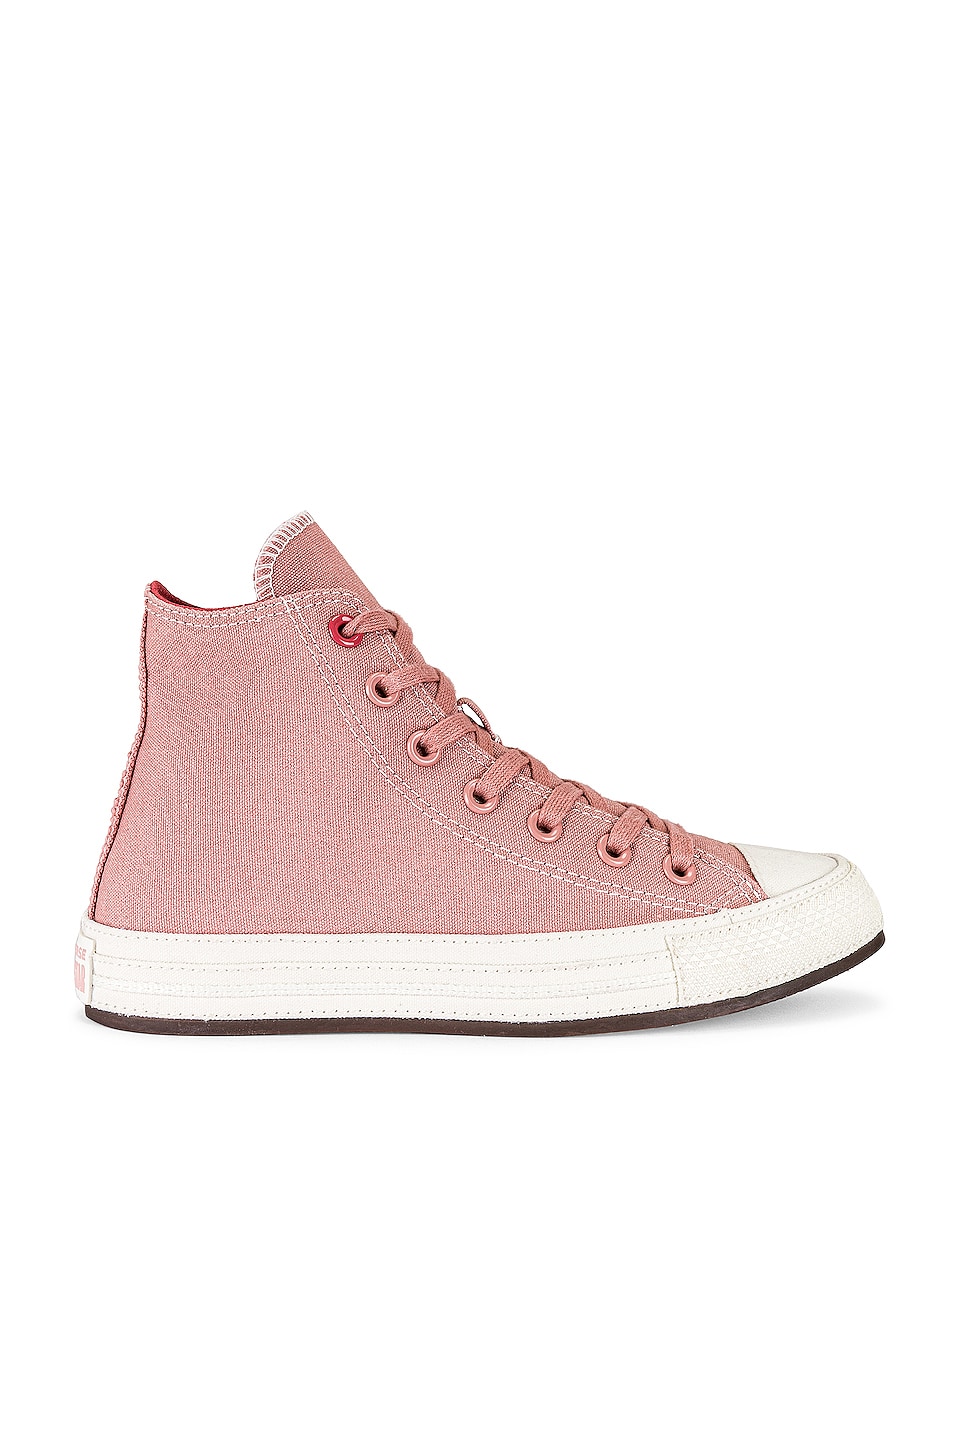 Image 1 of Chuck Taylor All Star Workwear Textiles Sneaker in Canyon Dusk, Egret, & Rhubarb Pie